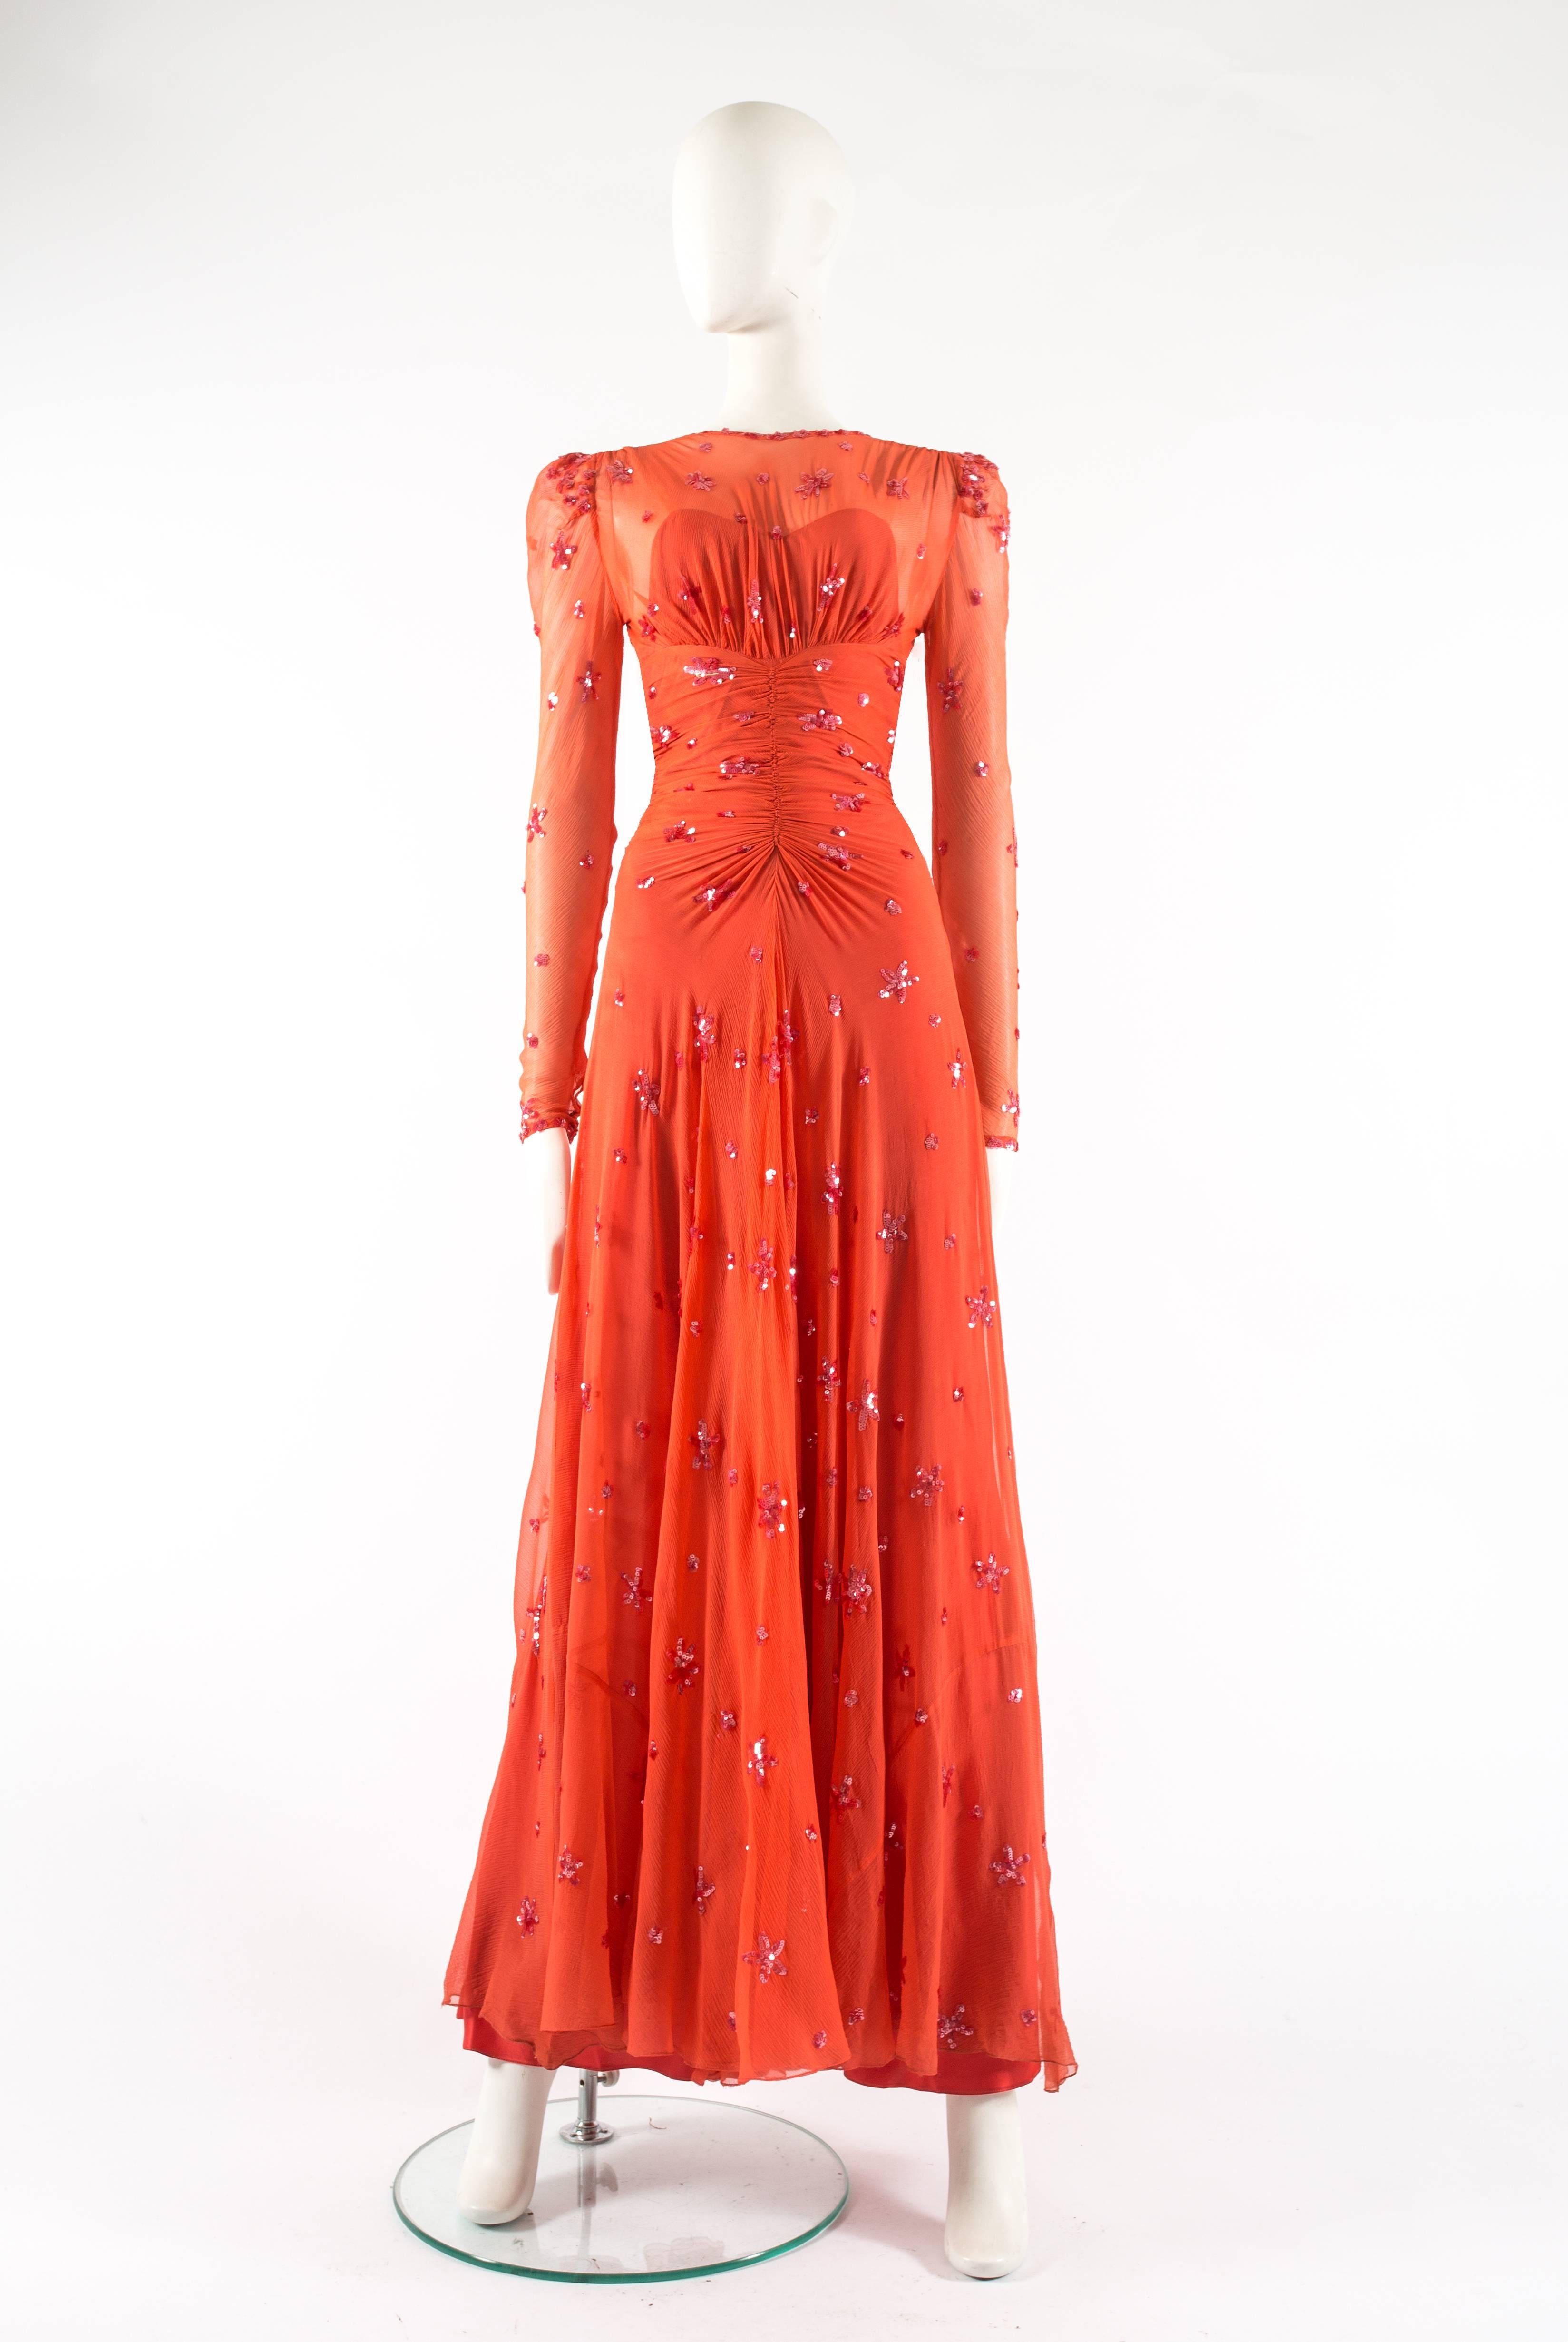 1930s coral silk chiffon evening dress with sequinned star embellishment

- silk underdress 
- hook-and-eye closures
